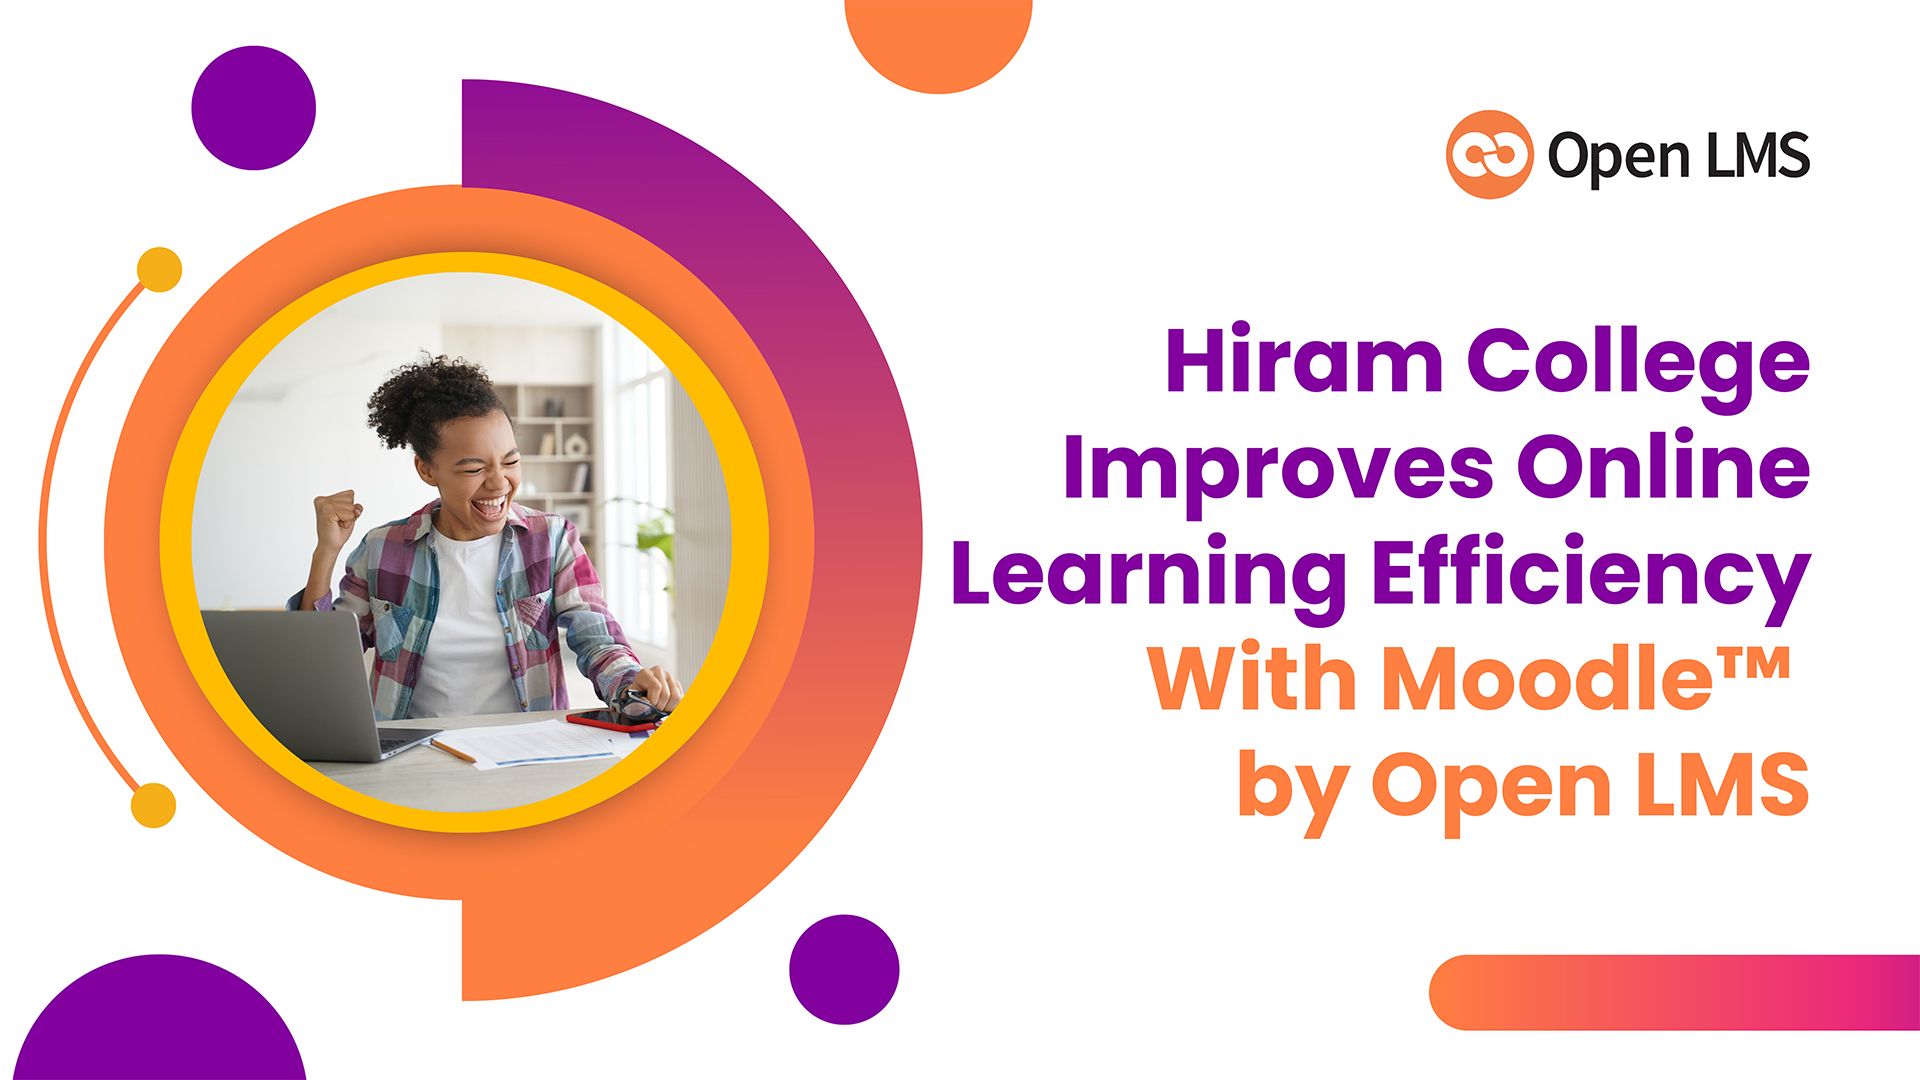 Hiram College Improves Online Learning Efficiency With Moodle™ by Open LMS